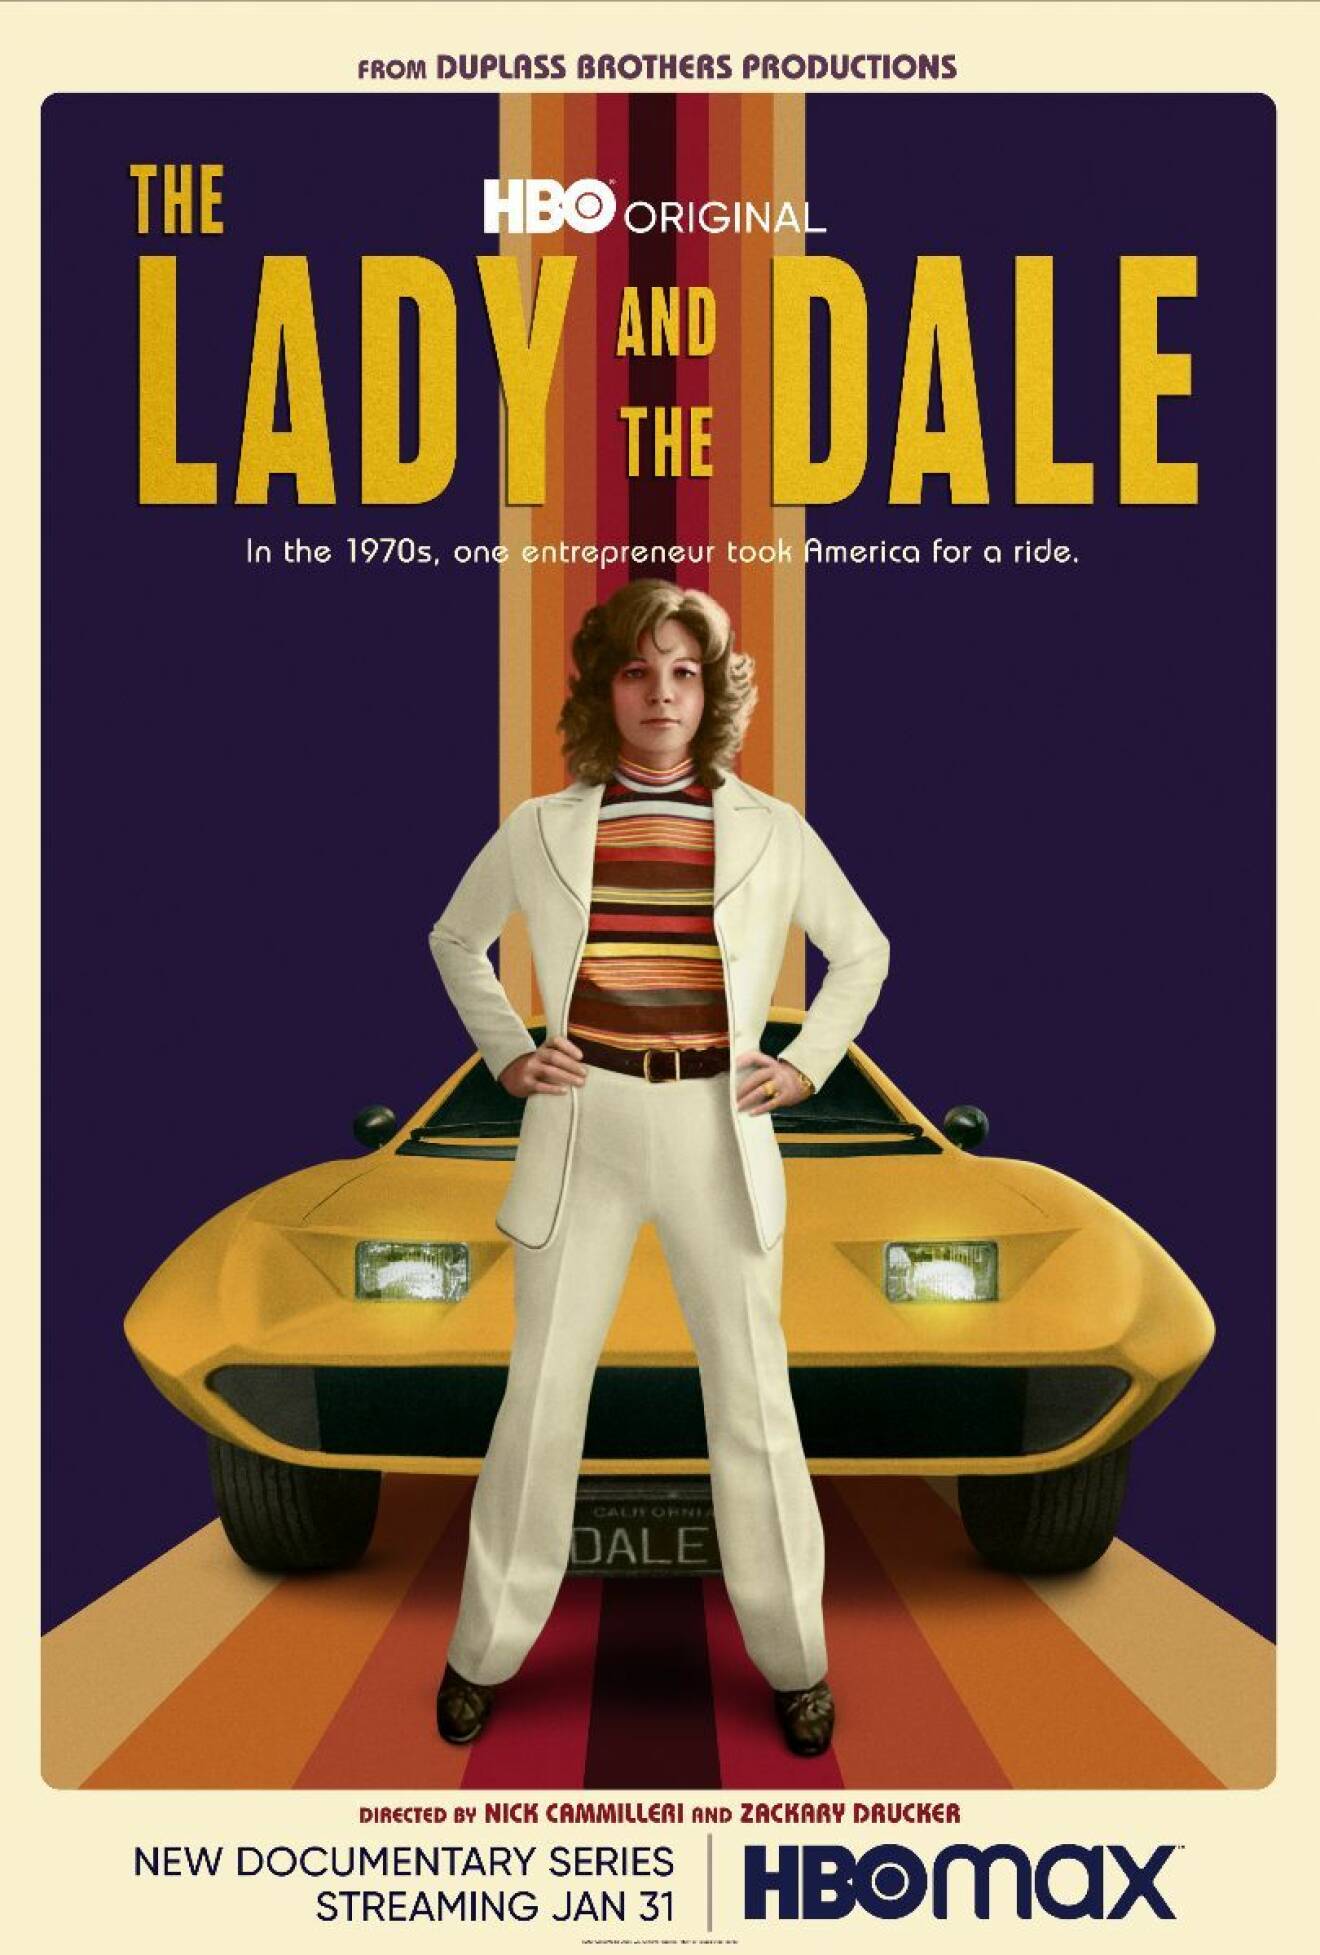 "The lady and the Dale"